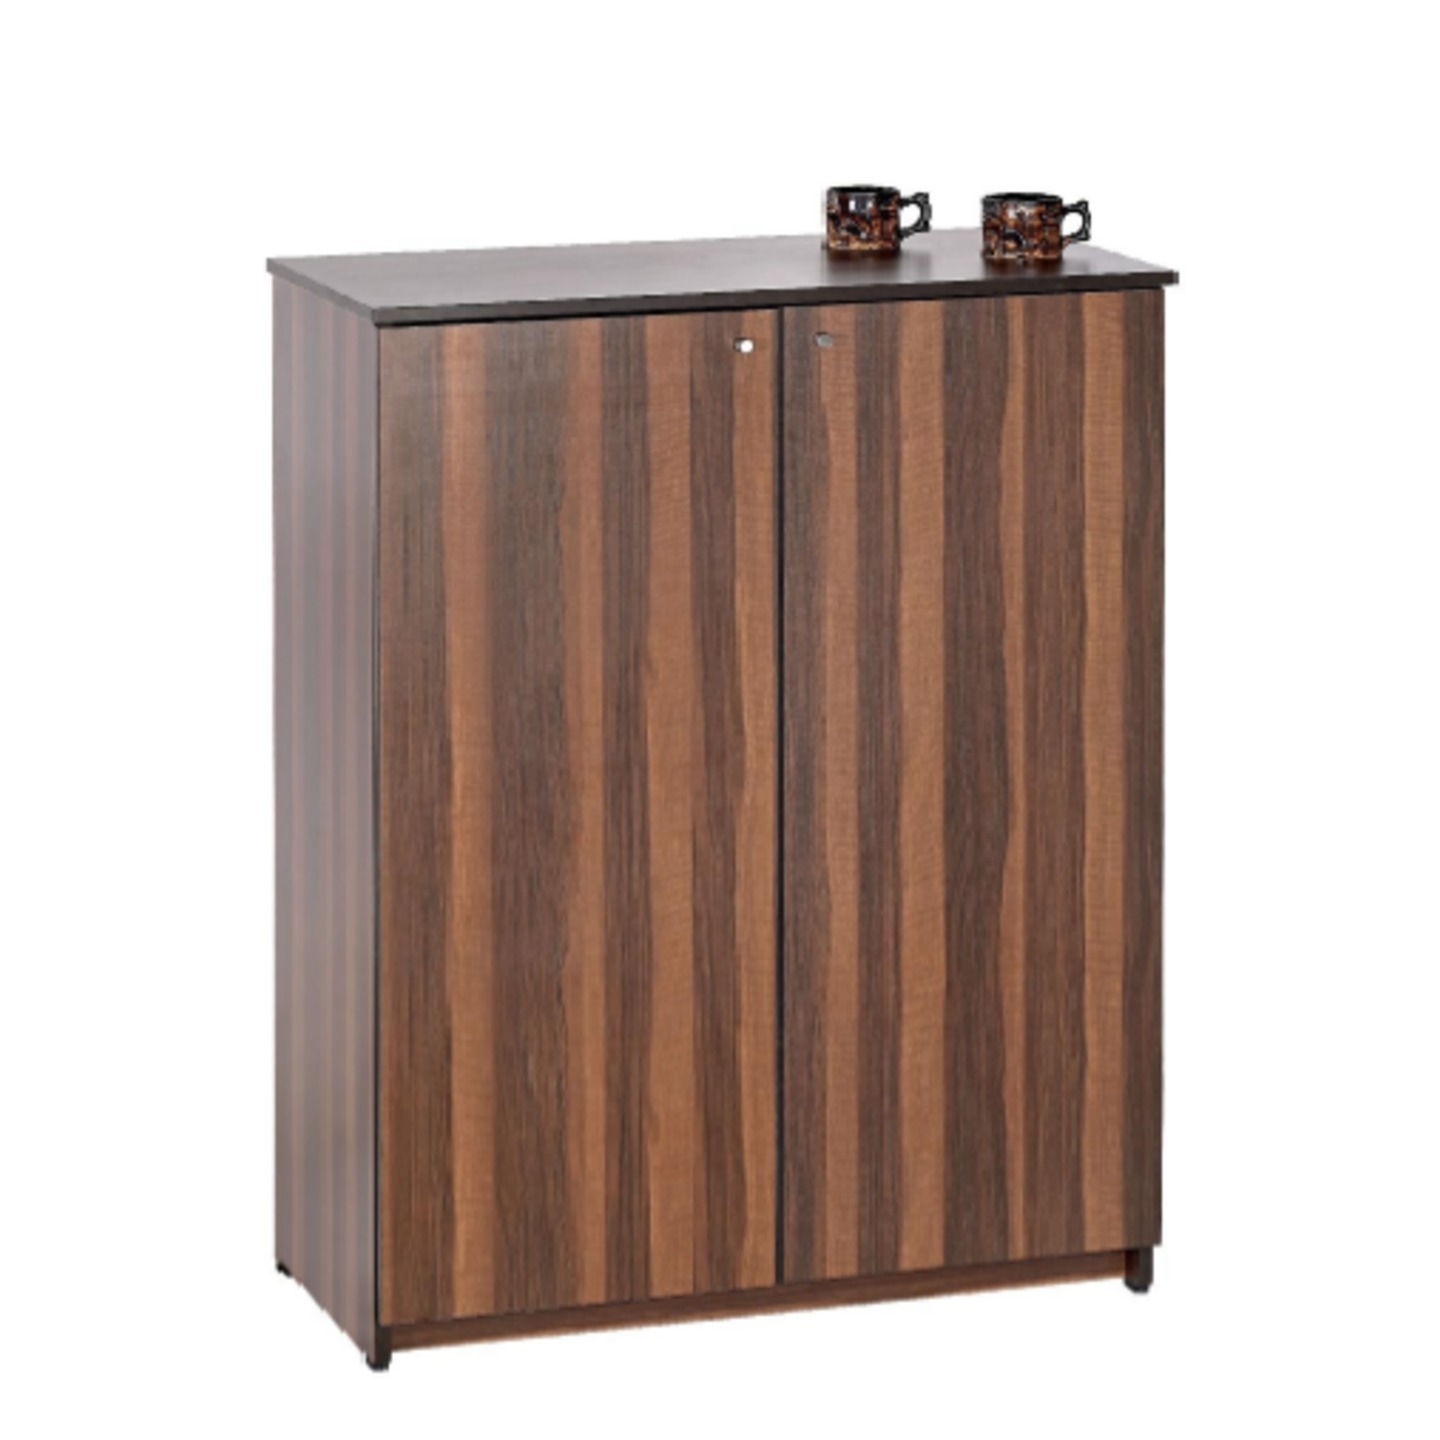 RD Multi Utility Cabinets RD-602 In Brown Colour